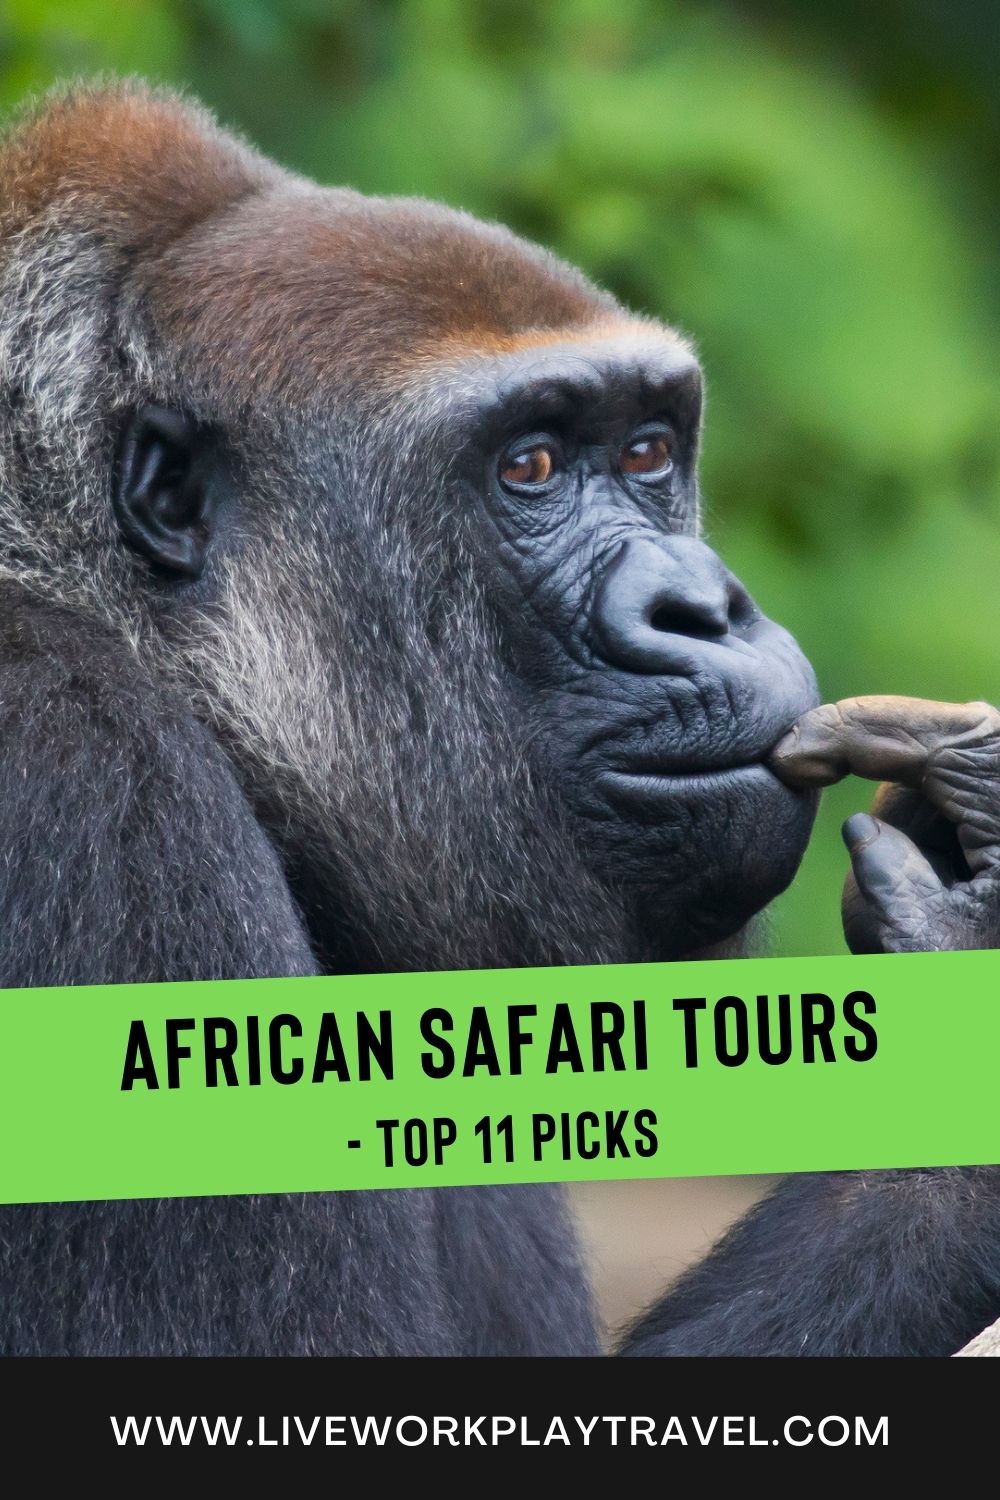 See A Gorilla In Botswana Like This One.